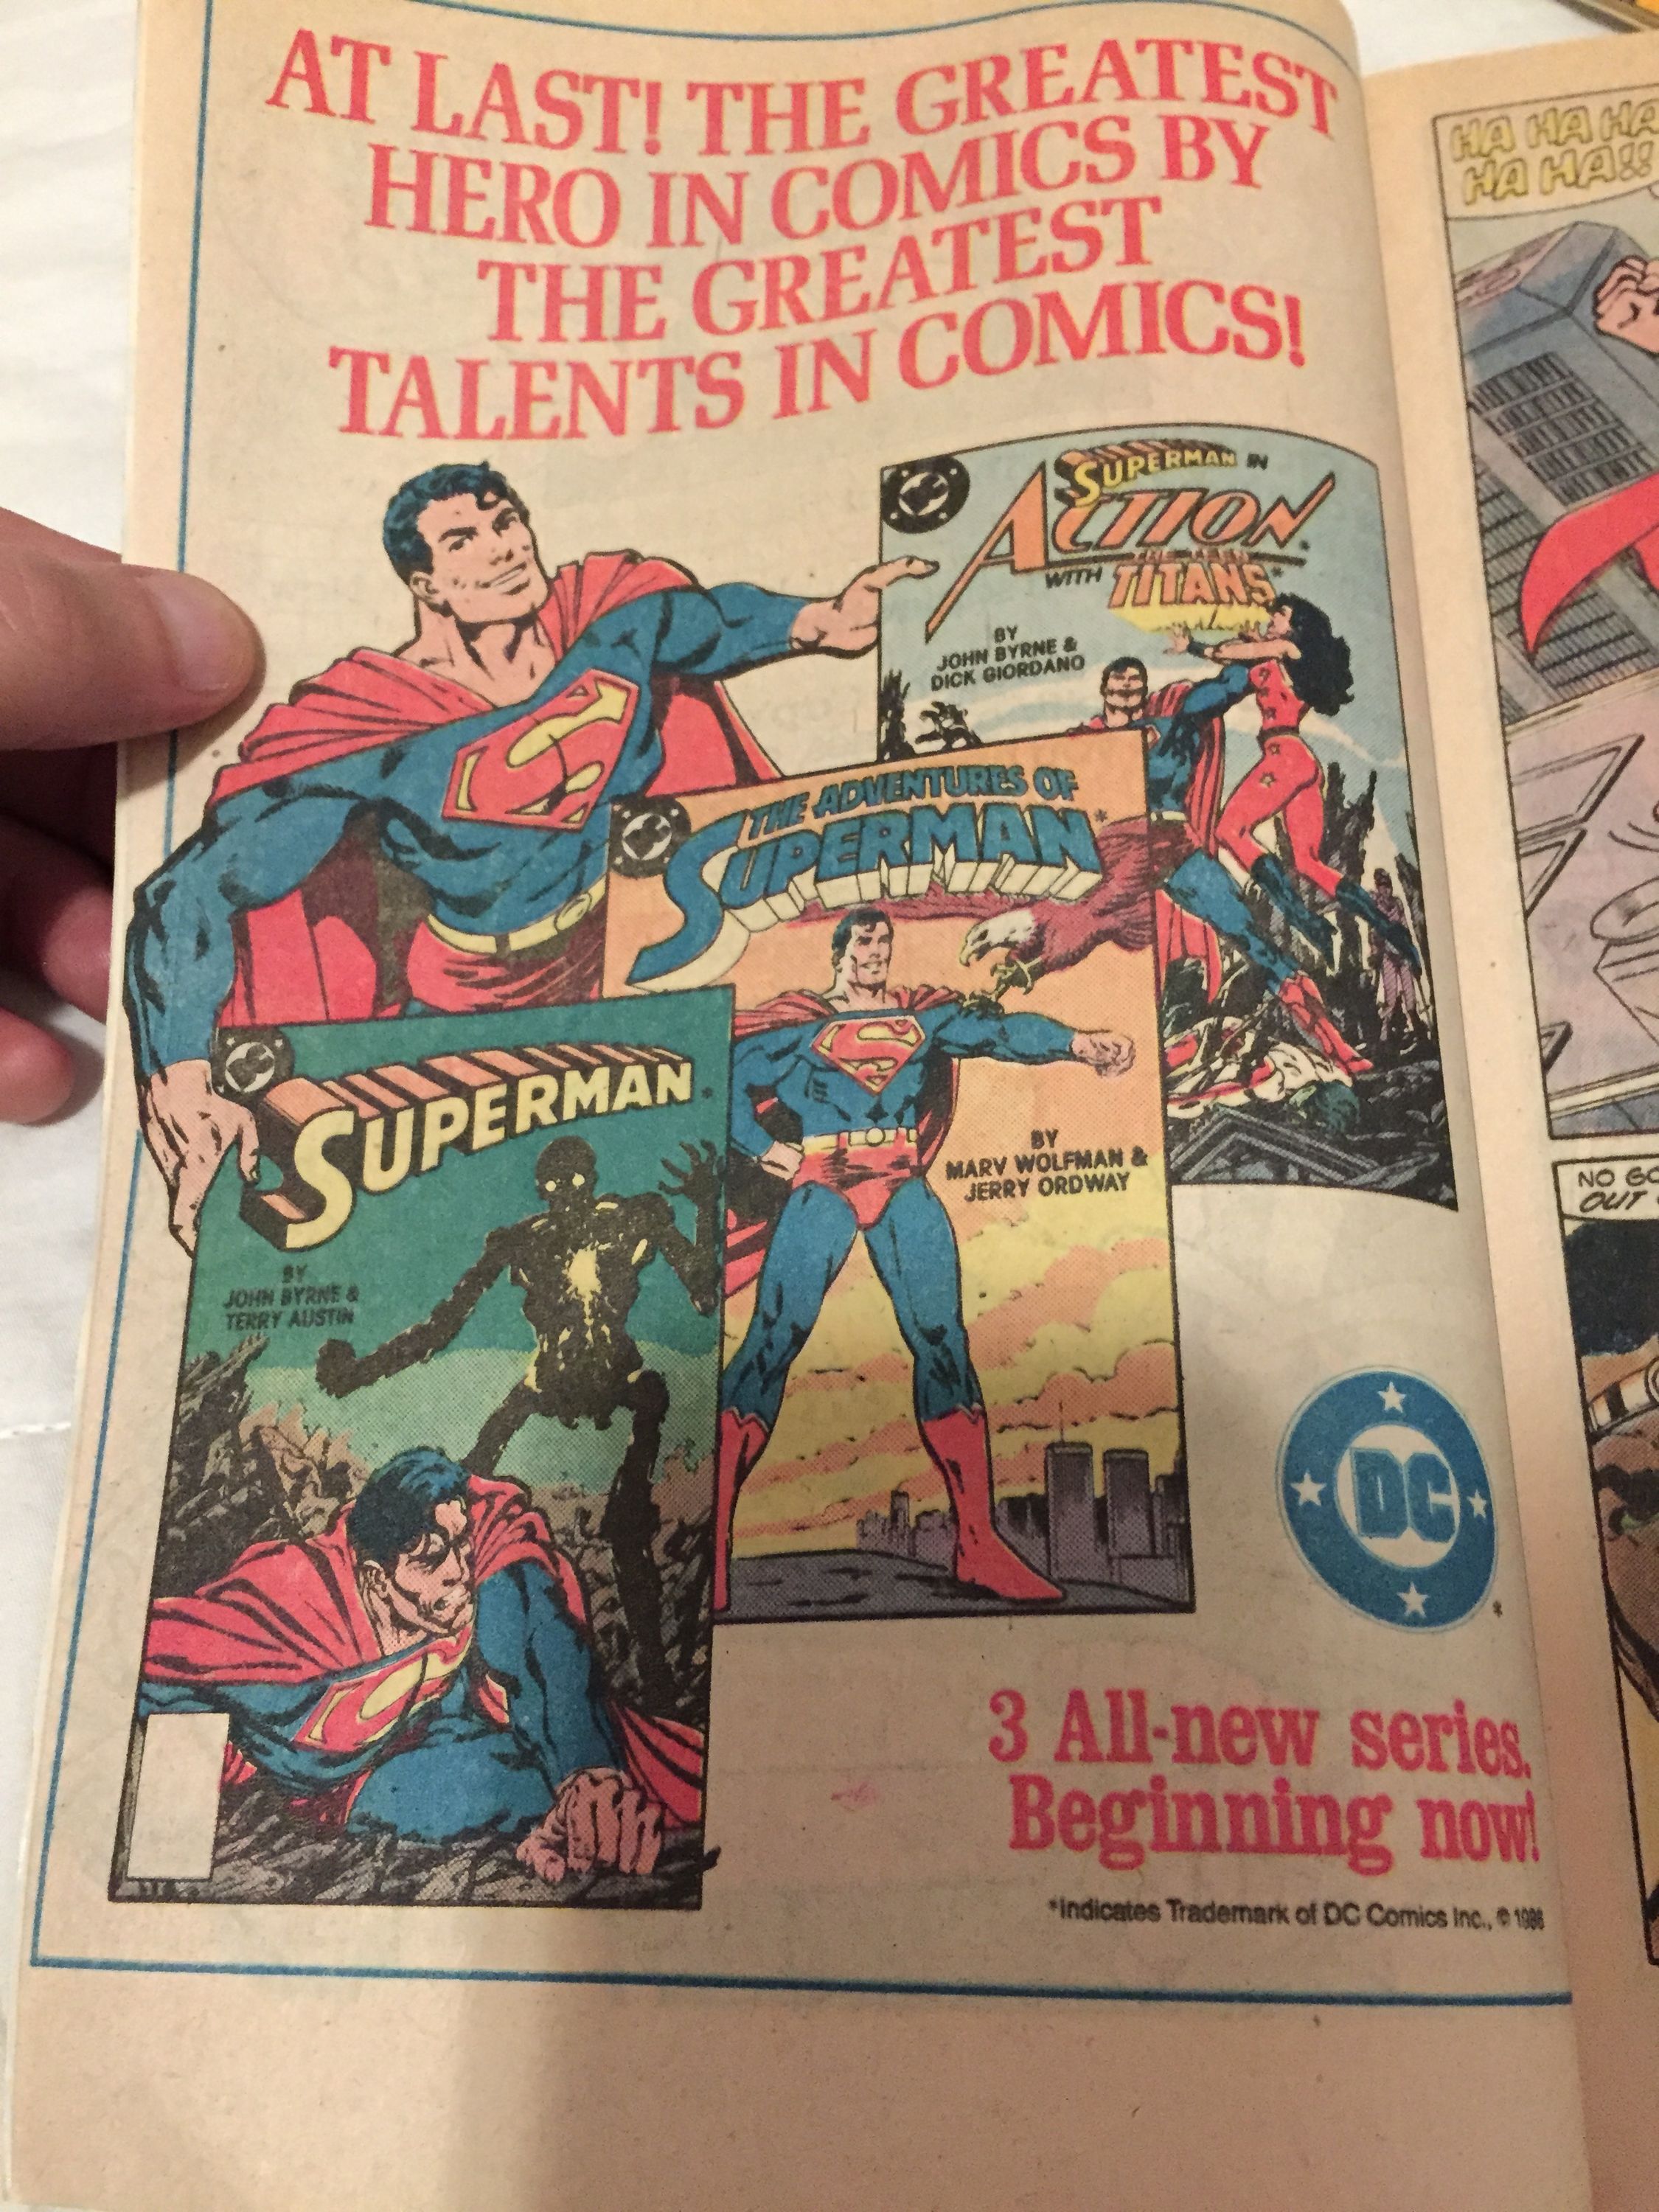 Internal DC comics ad for the three new Superman books in 1987. Superman, The Adventures of Superman, and Action Comics. Text reads AT LAST! THE GREATEST HERO IN COMICS BY THE GREATEST TALENTS IN COMICS!